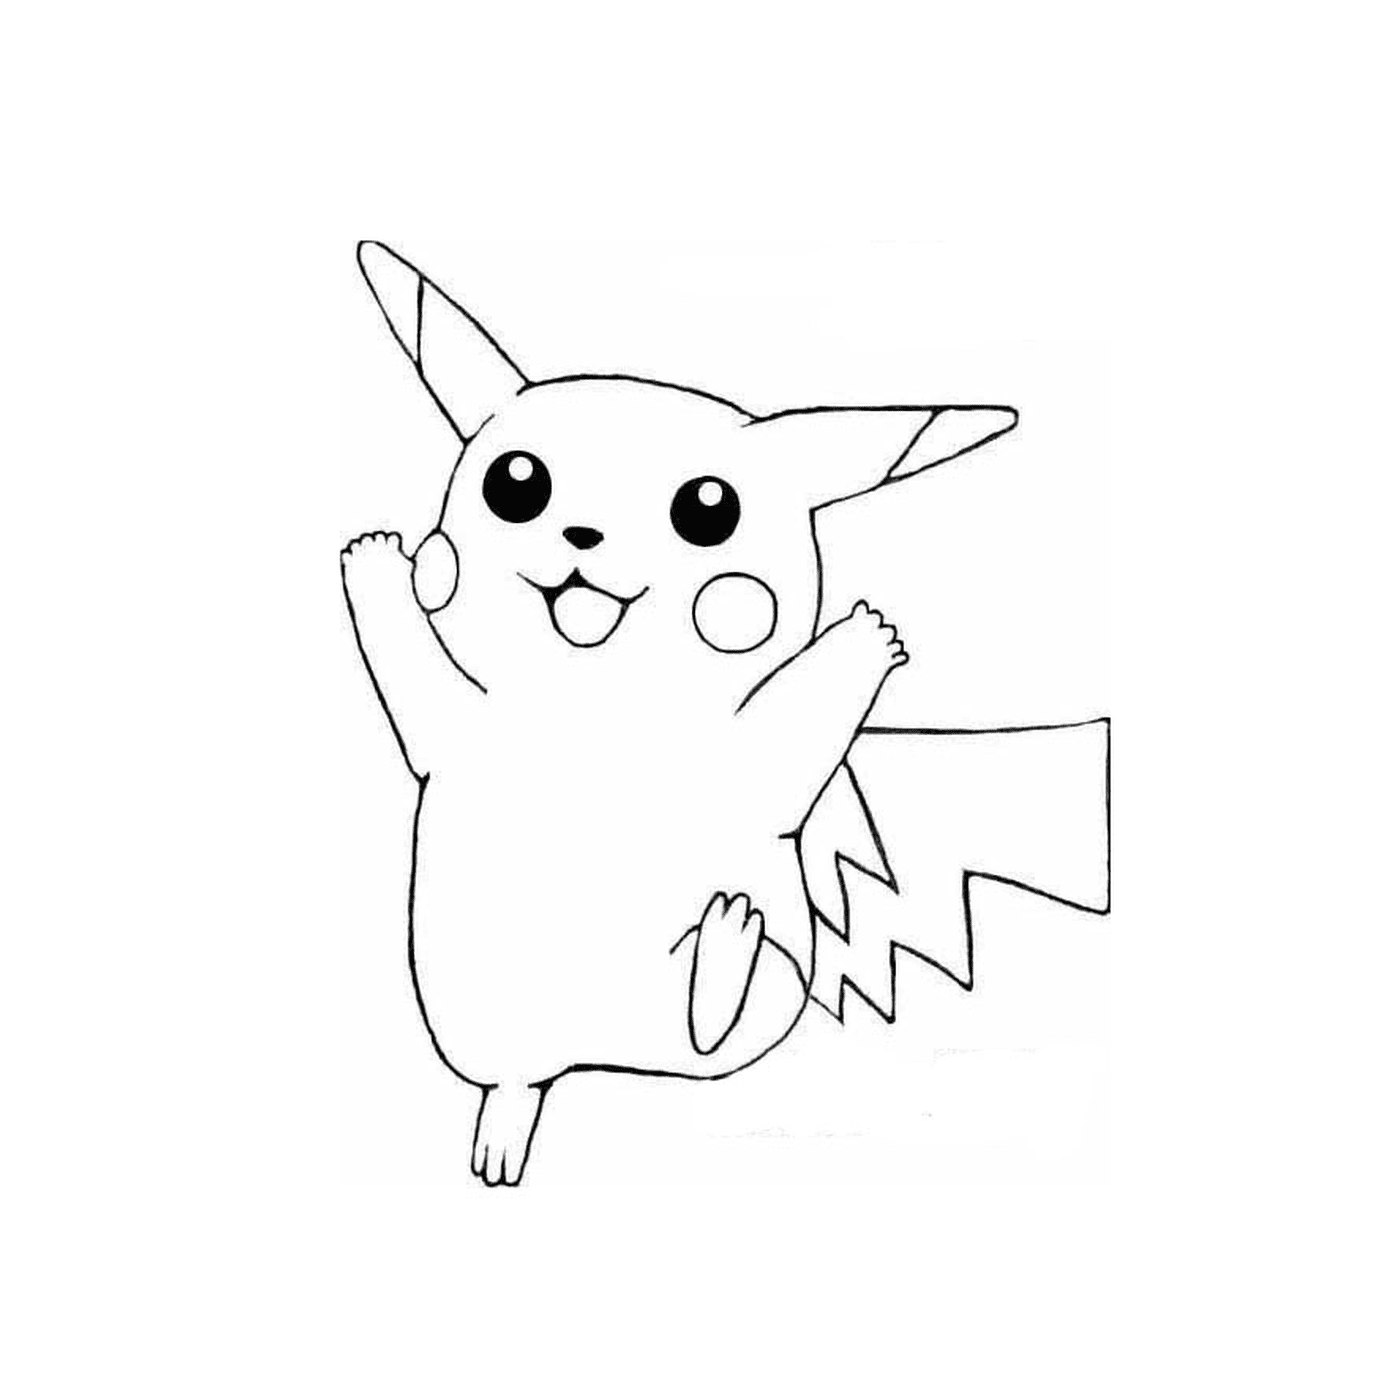  Pikachu in easy to draw version 